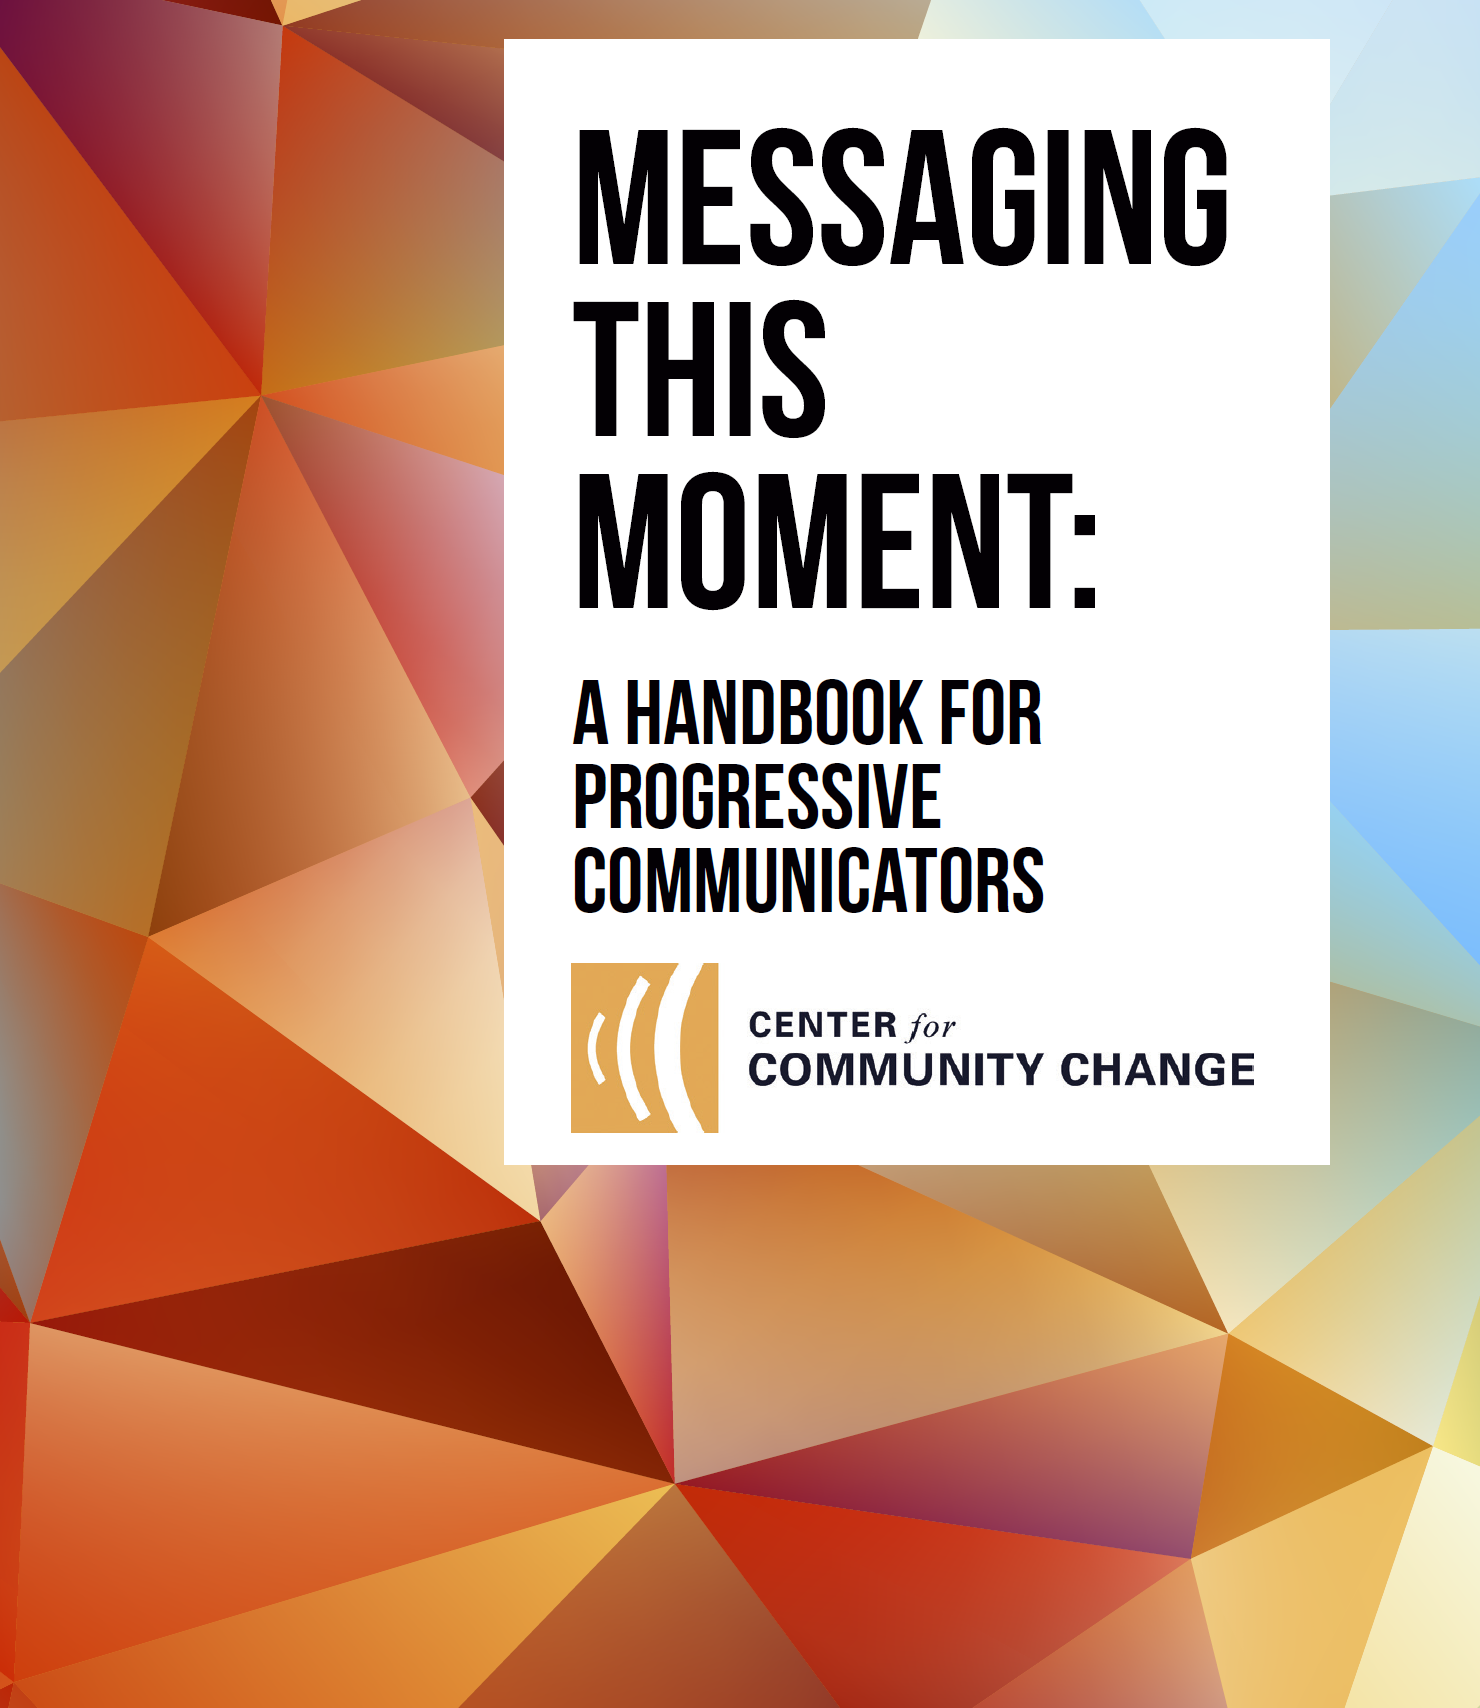 Cover of "Messaging the Moment" featuring geometric shapes behind title text.